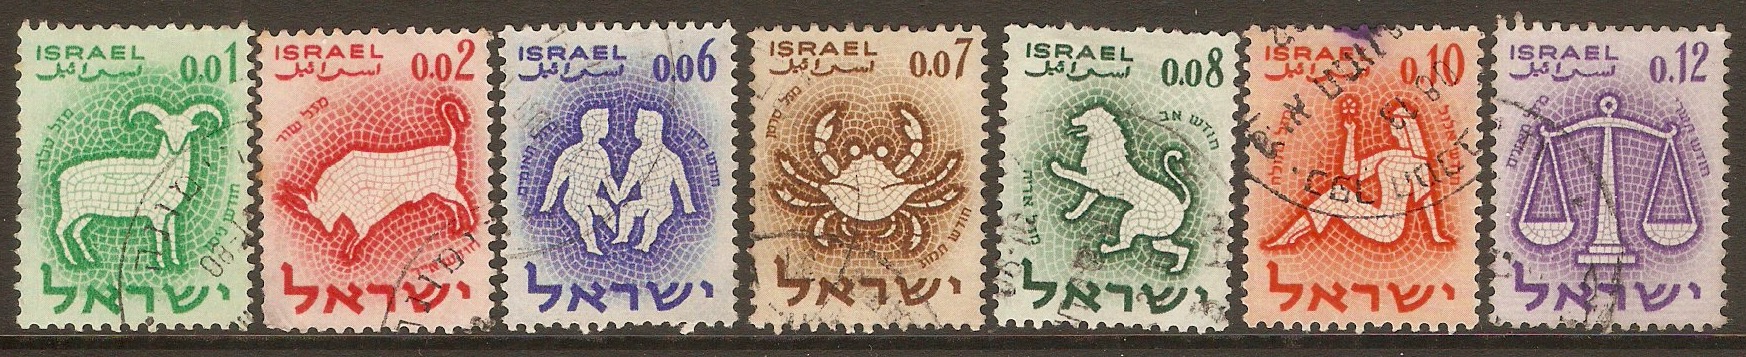 Israel 1961 Signs of the Zodiac set. SG198-SG204. - Click Image to Close